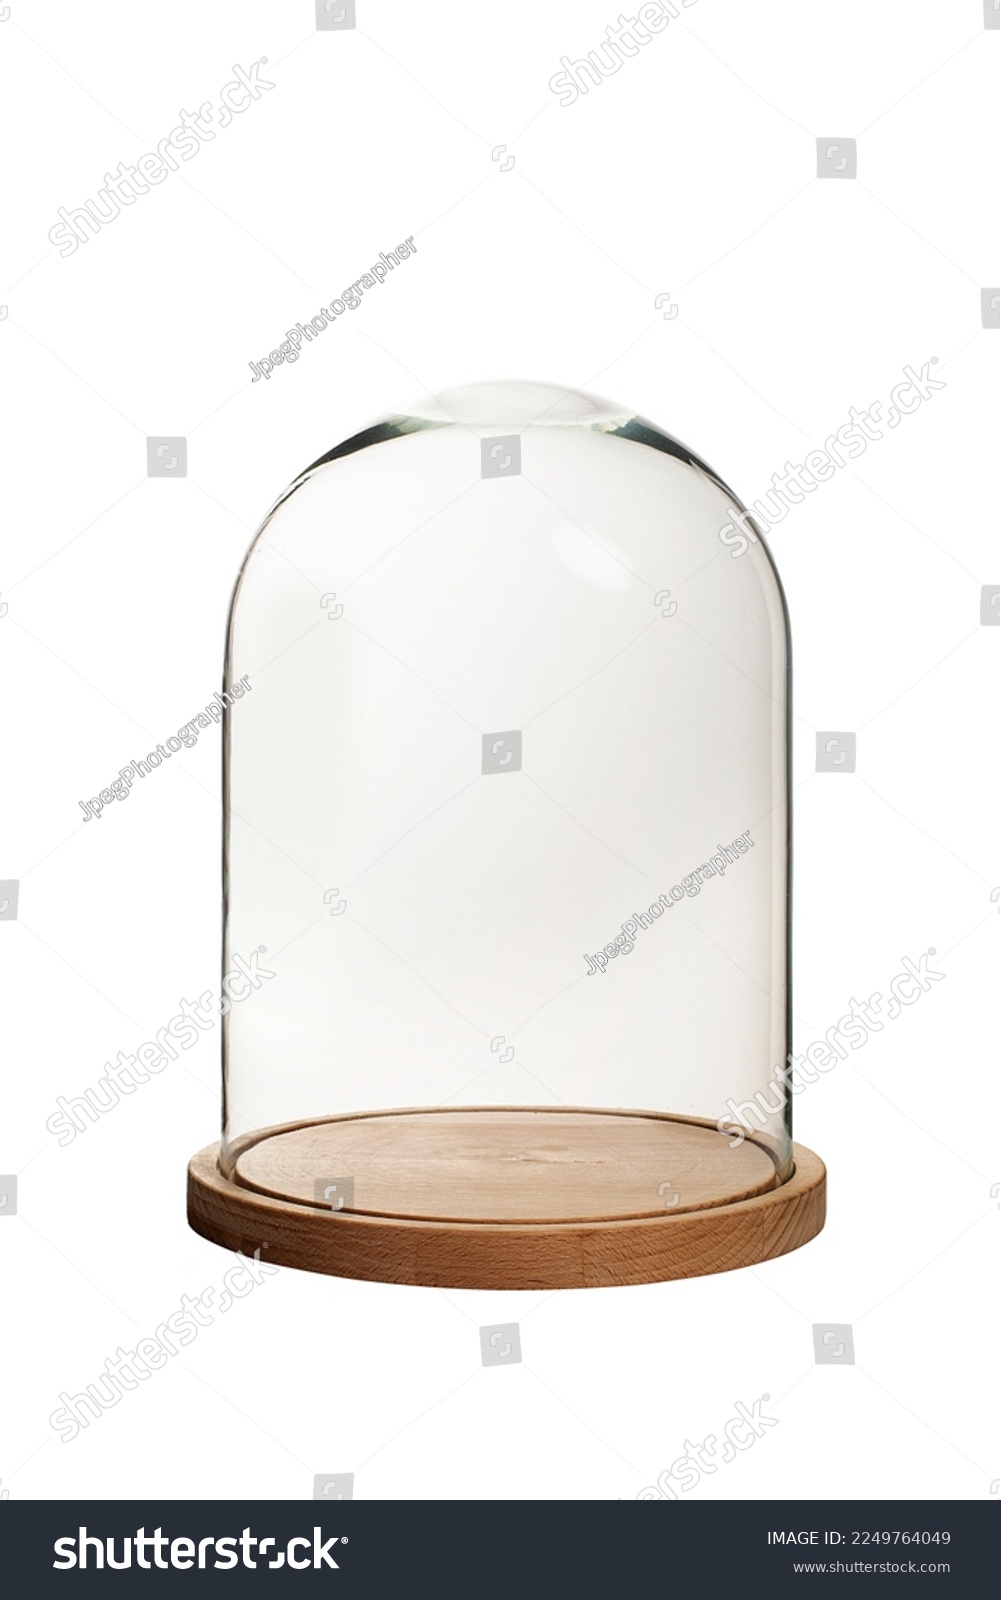 Glass dome with wooden base, protective transparent glass cover  #2249764049